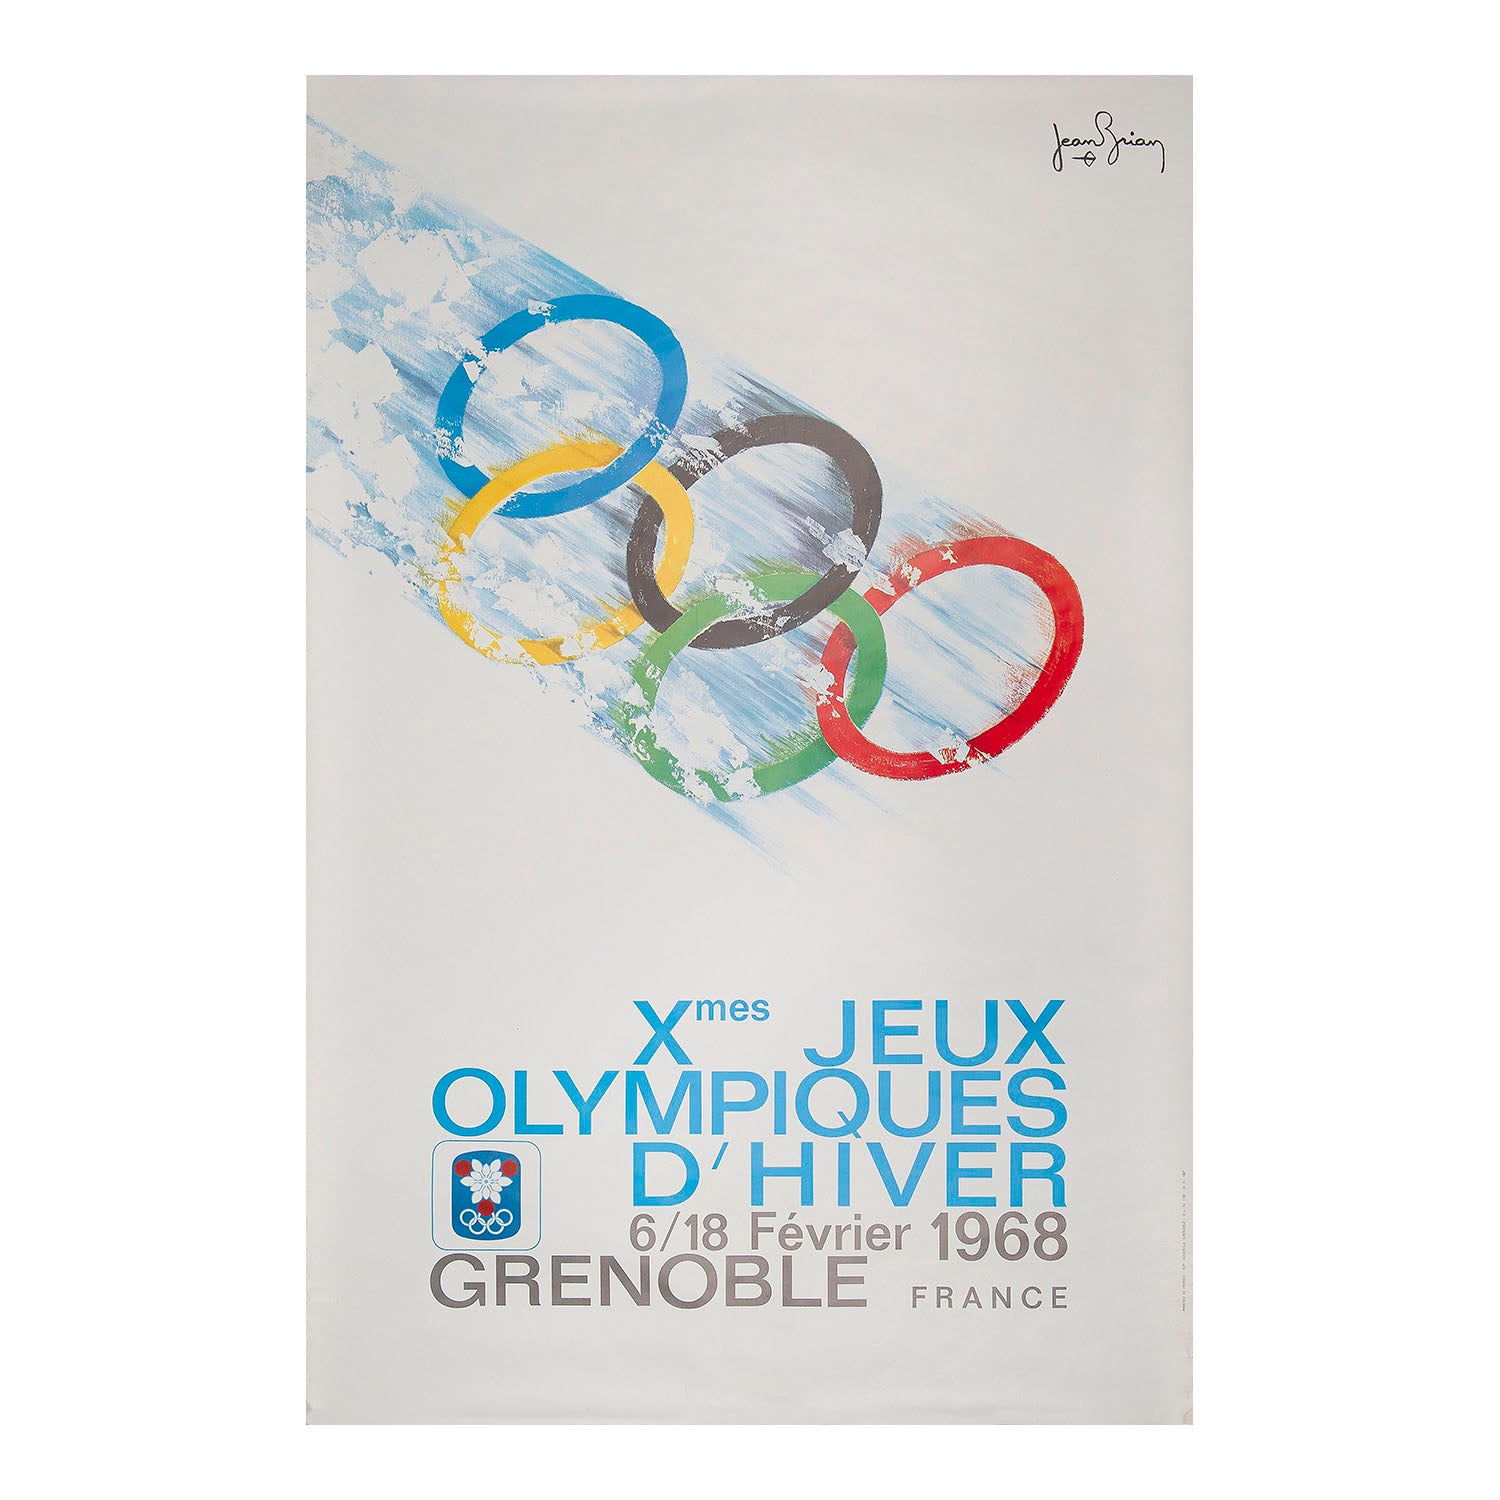 Original poster for the 1968 Winter Olympic Games (Jeux Olympiques D’Hiver), held in Grenoble France from 6-18 February 1968. An especially effective design by Jean Brian (1910-1990) depicting the multicoloured Olympic rings speeding through the snow like an Olympic skier, with text and logo below